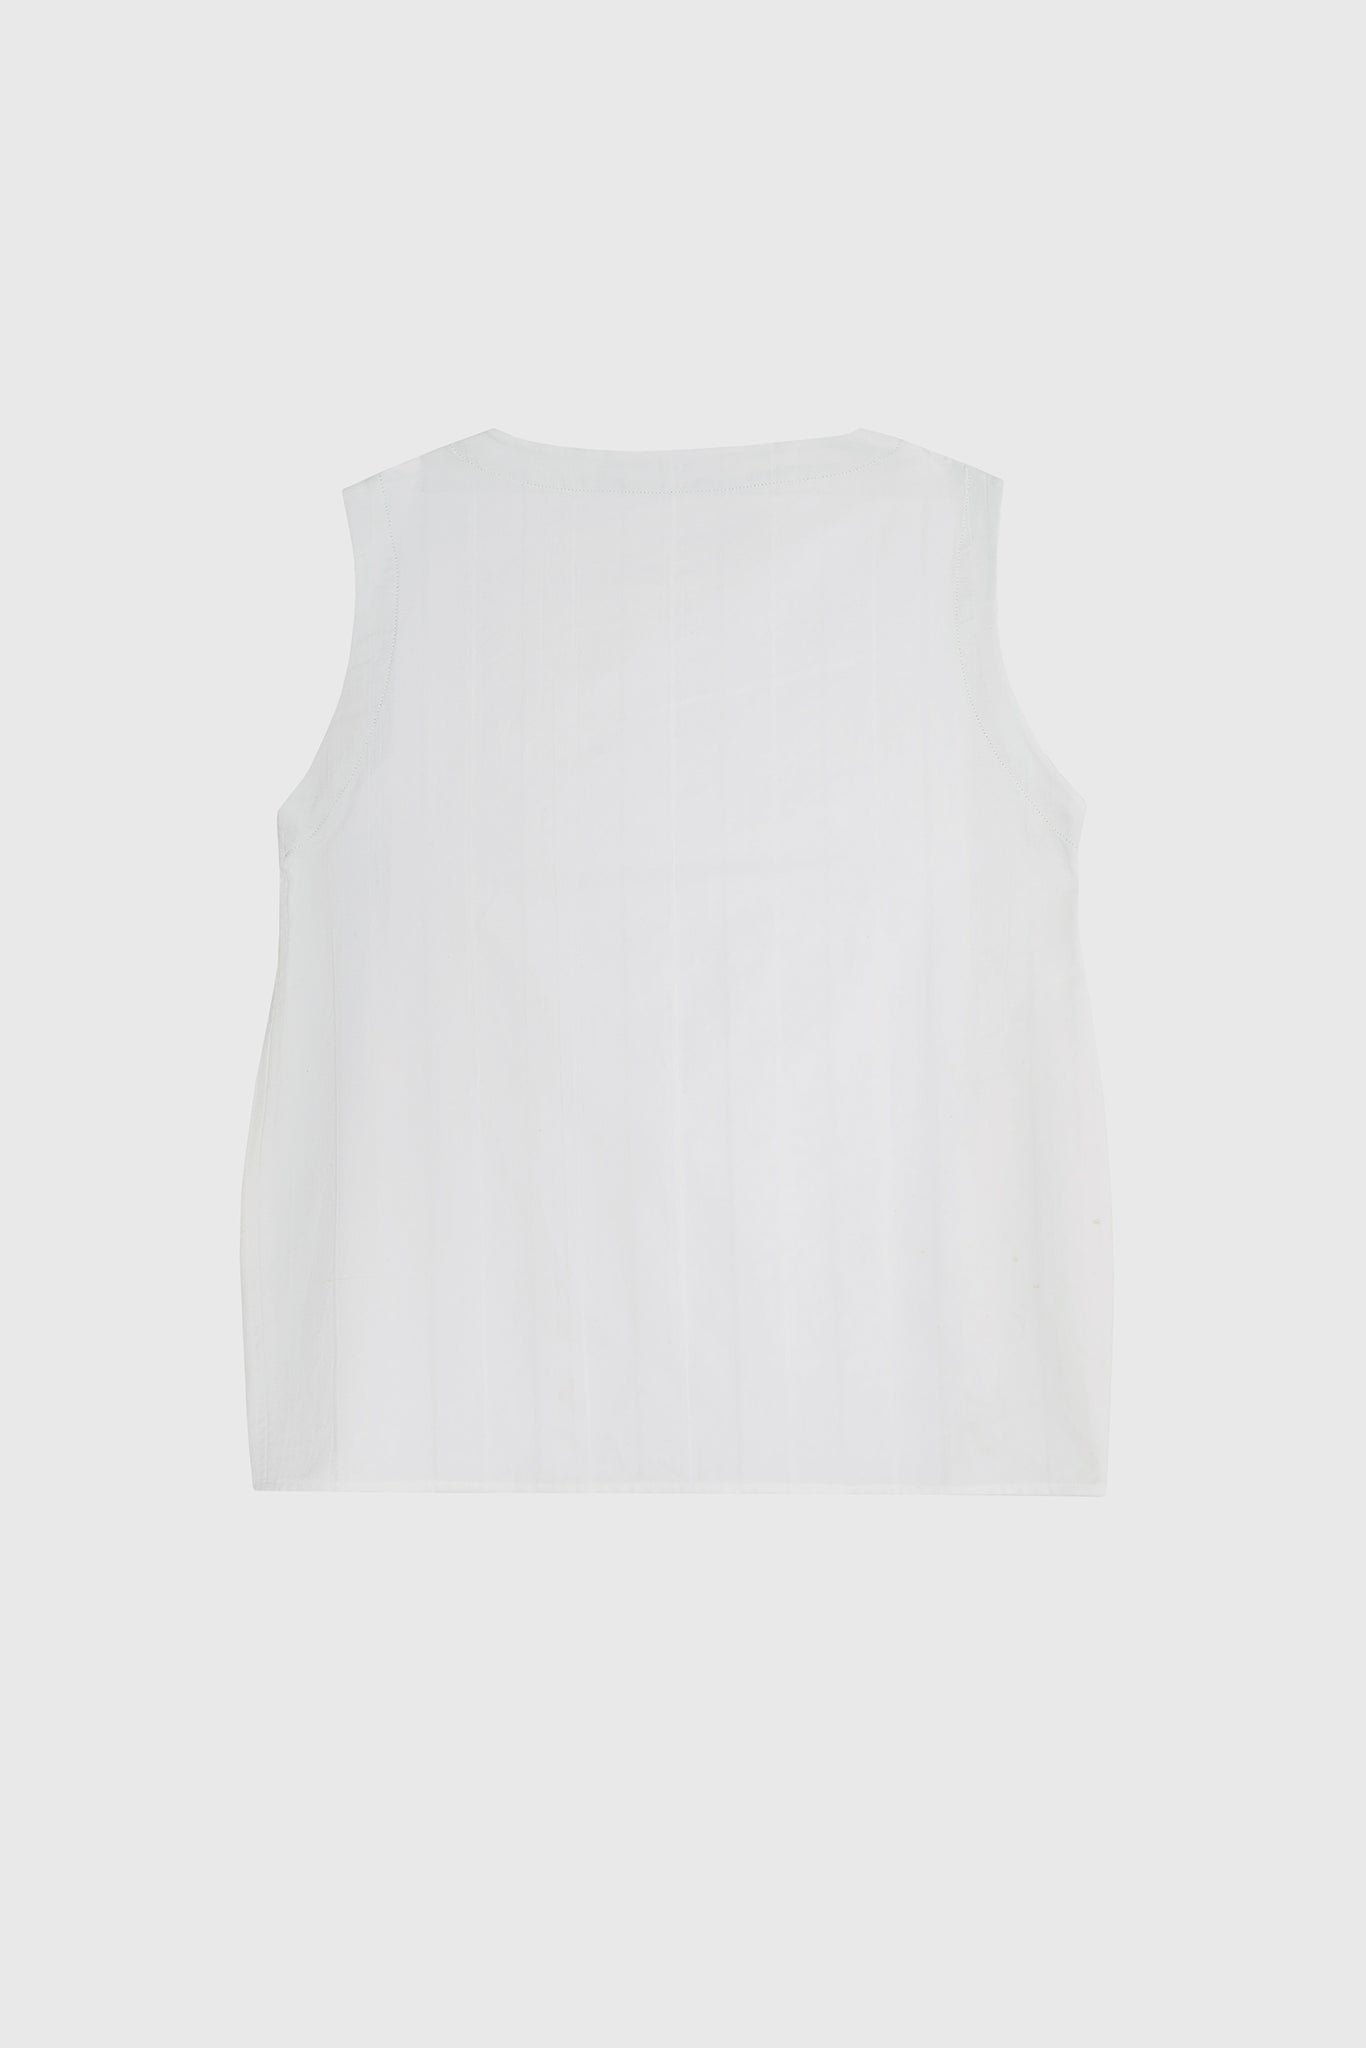 simple T-shirt, curved sides, sleeveless, easy to style with any outfit, pops out at parties and reunions